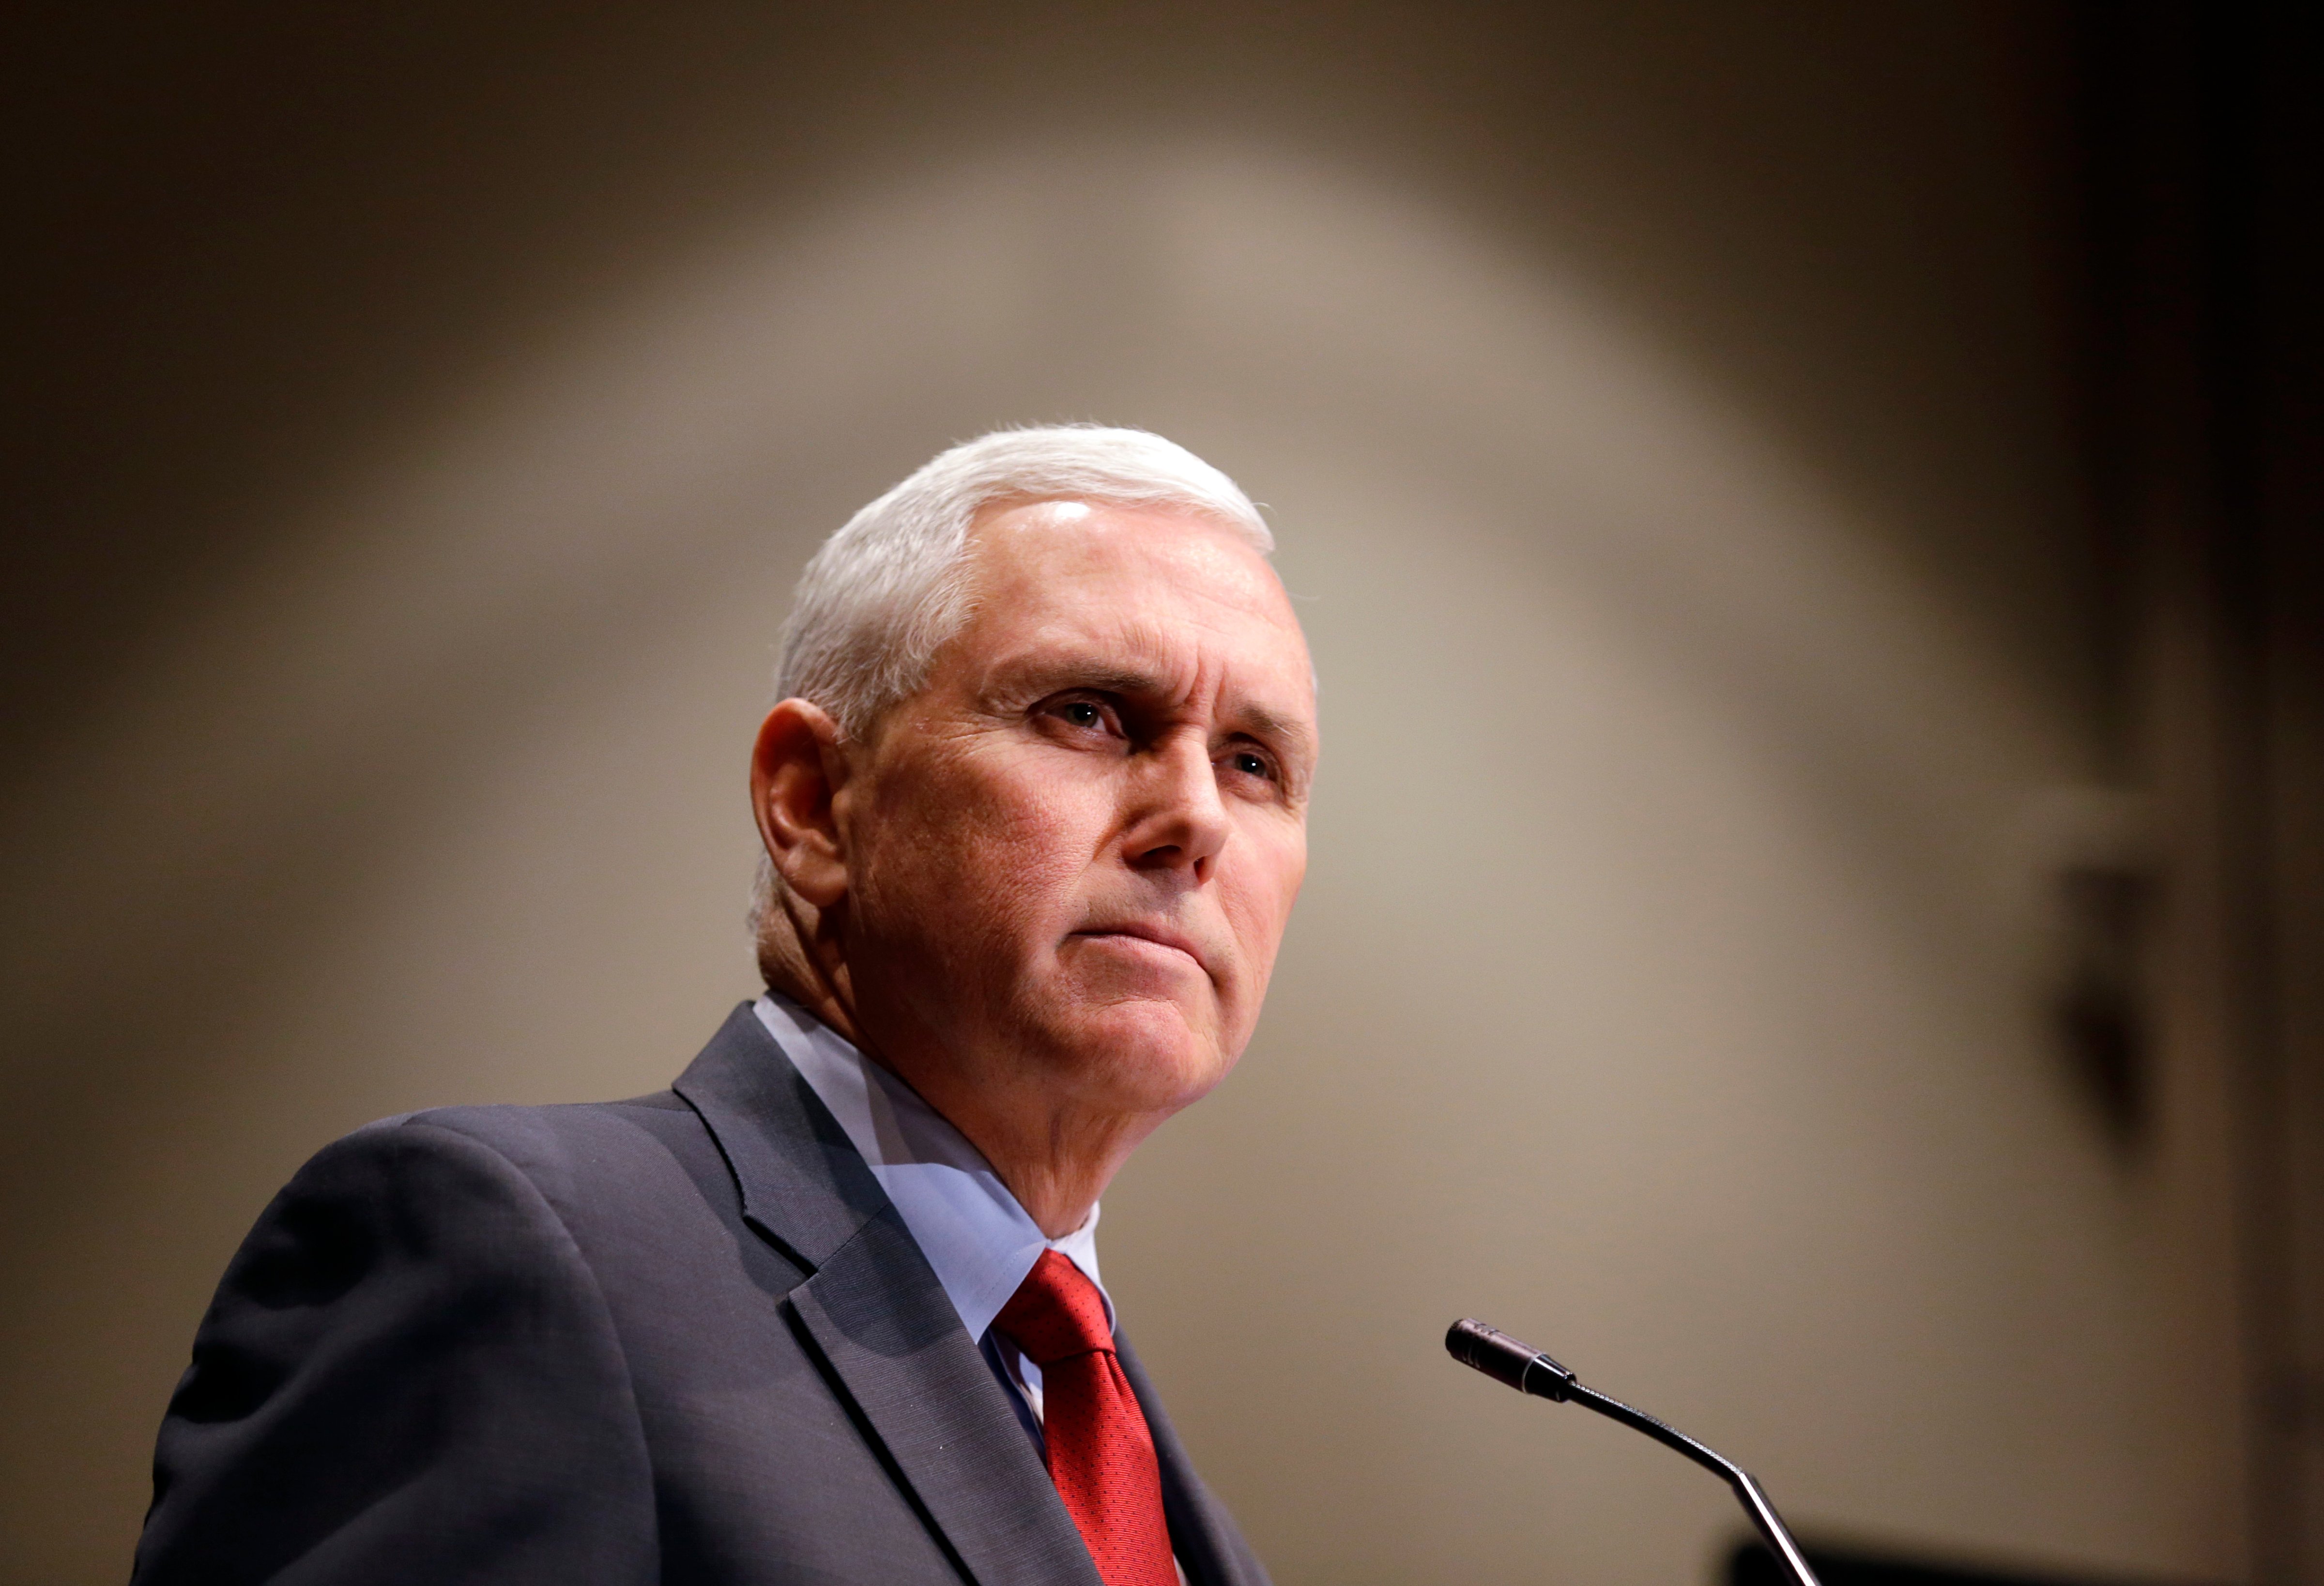 Indiana Gov. Mike Pence plans to launch what would amount to a state-run, taxpayer-funded news outlet in February. But on Wednesday, he appeared to back away from plans to unveil the site. (Michael Conroy—AP)